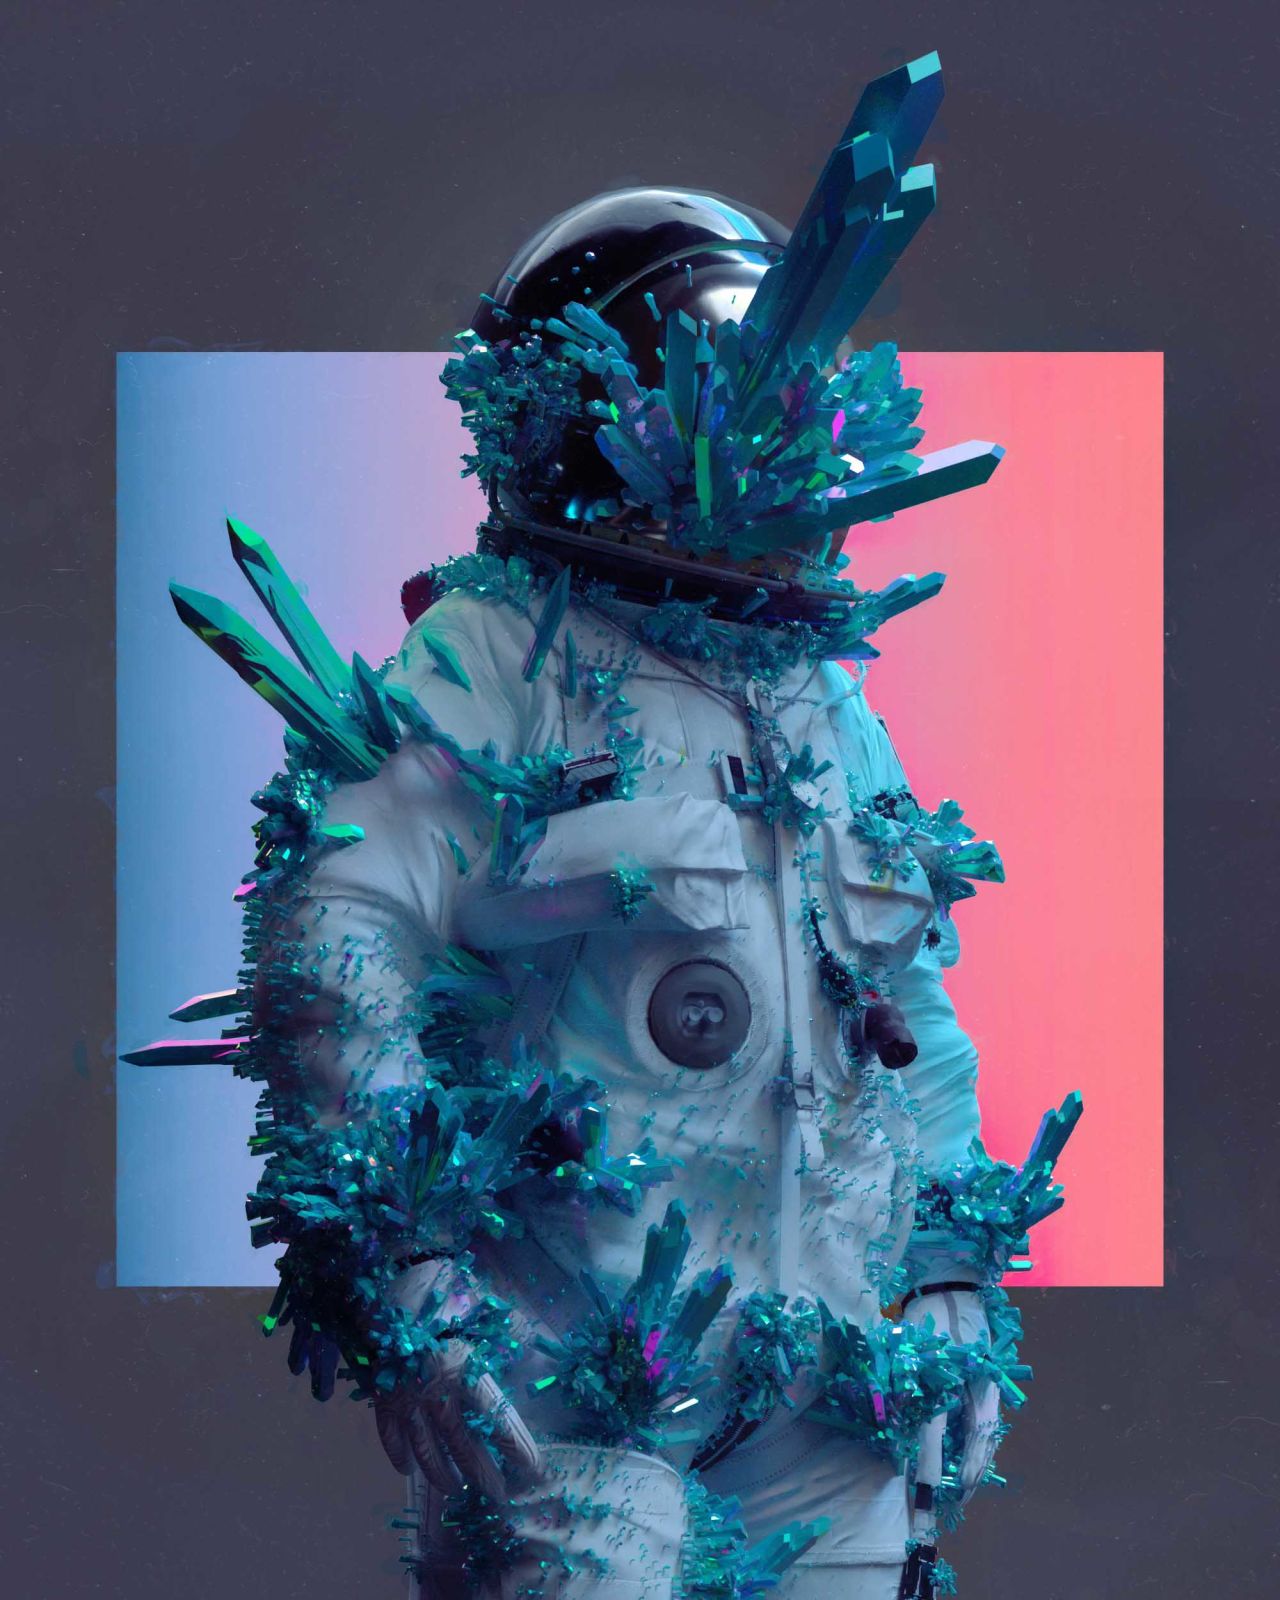 Beeple, whose real name is Mike Winkelmann, took one photo per day for 13 years.